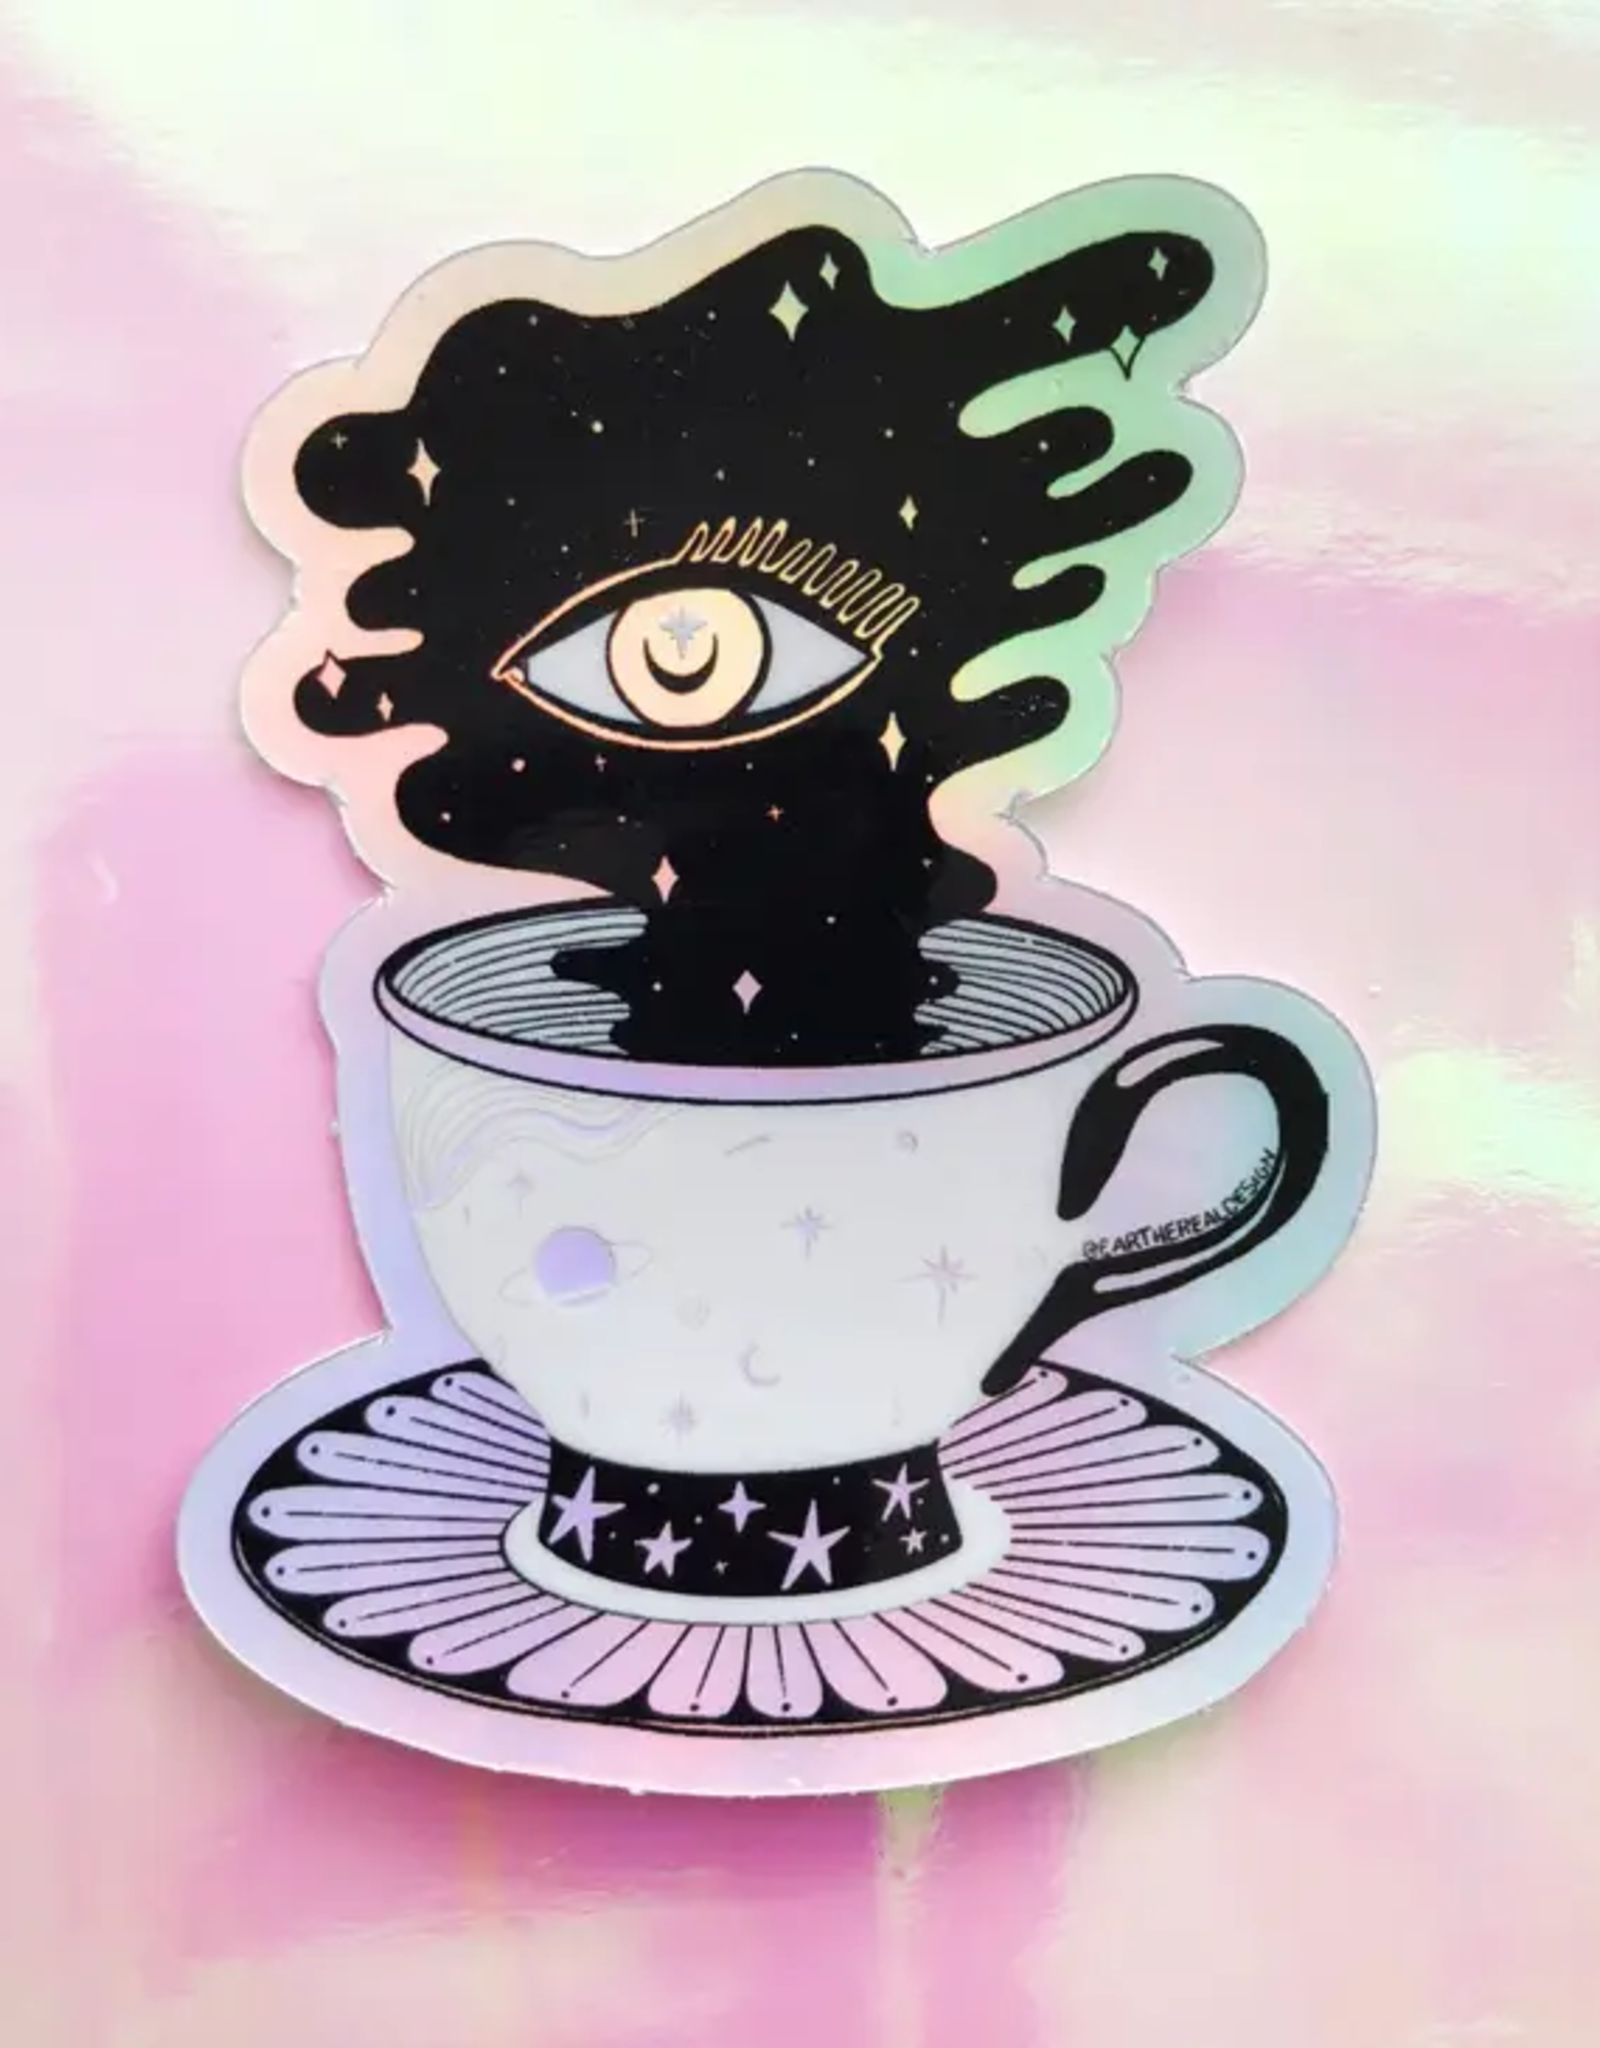 Tasseography Teacup Holographic Sticker